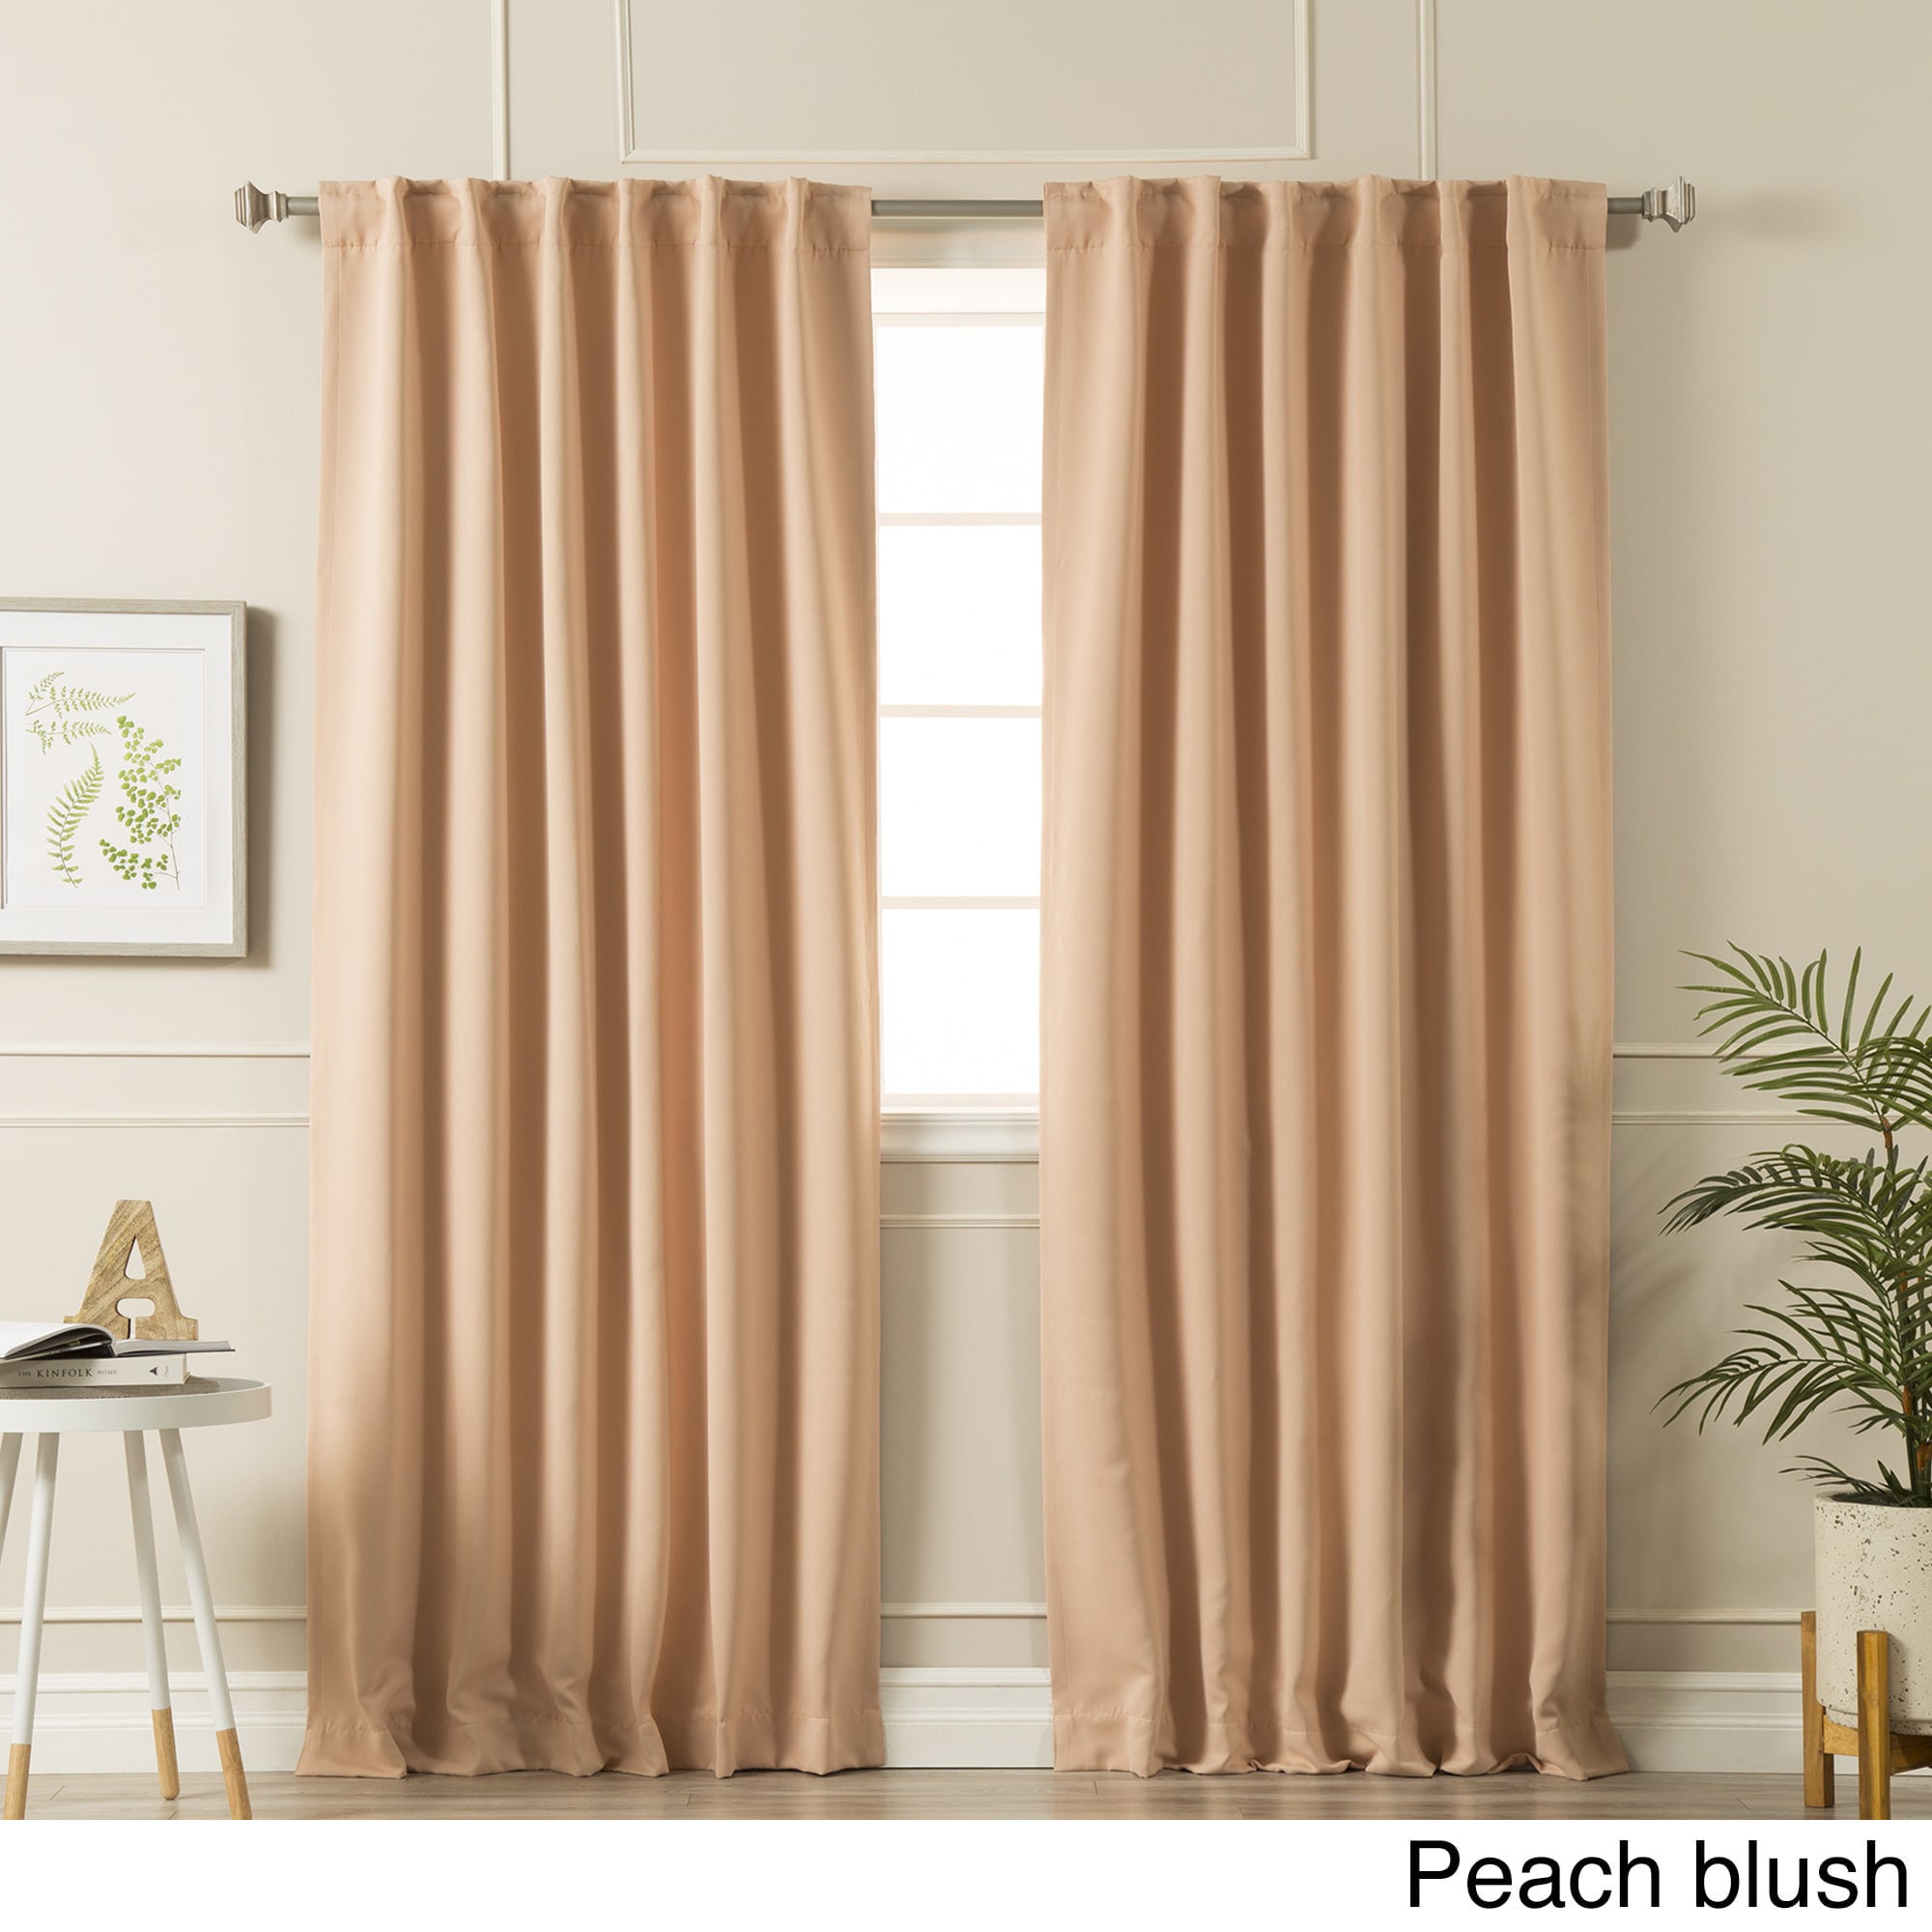 Aurora Home Solid Insulated Thermal Blackout Curtain Panel Pair N/A 52 ...